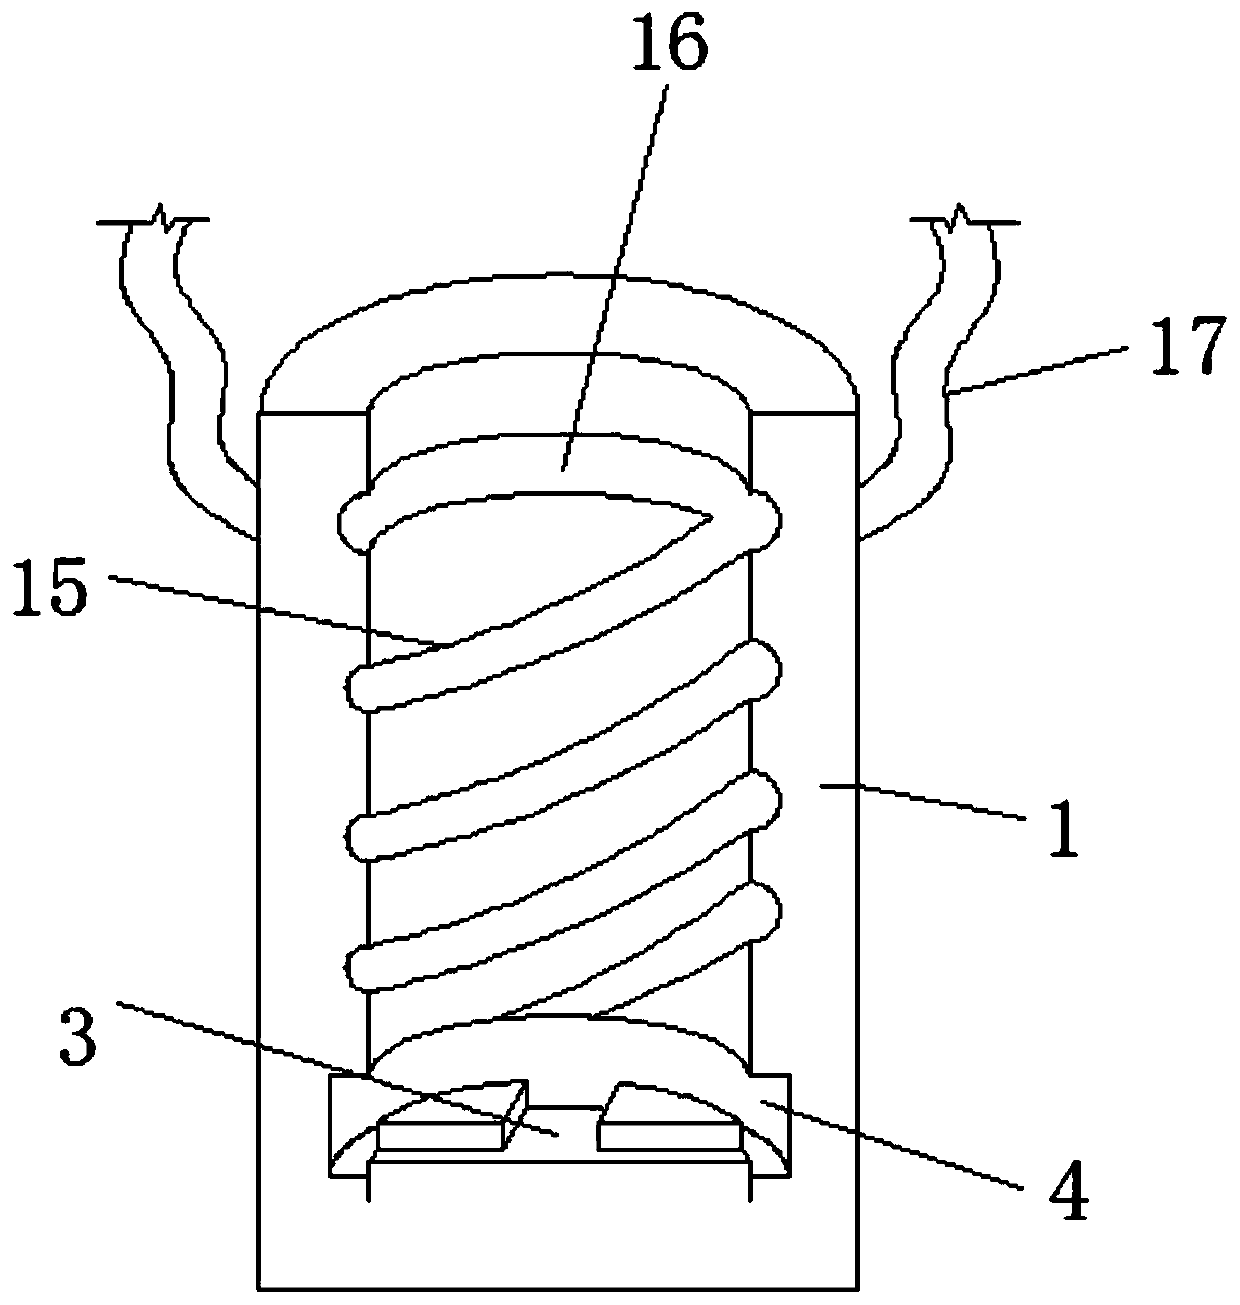 A stamping head with heat dissipation function for stamping